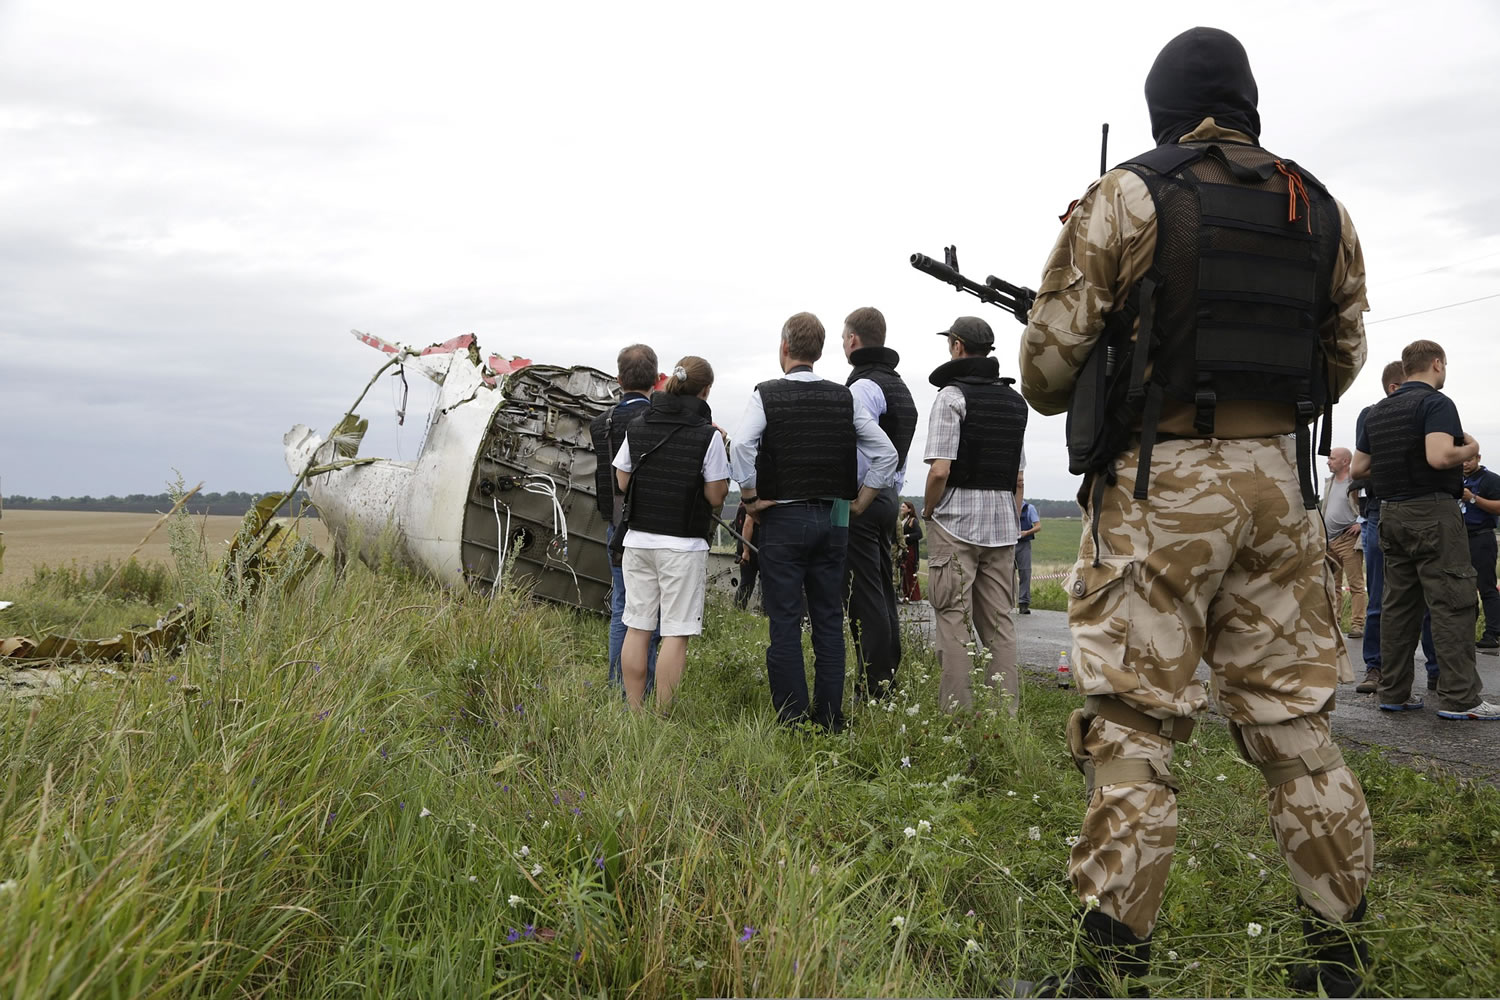 Representatives from the Organization for Security and Cooperation and Ukrainian experts arrive today at the crash site of the Malaysia Airlines jet, near the village of Hrabove.